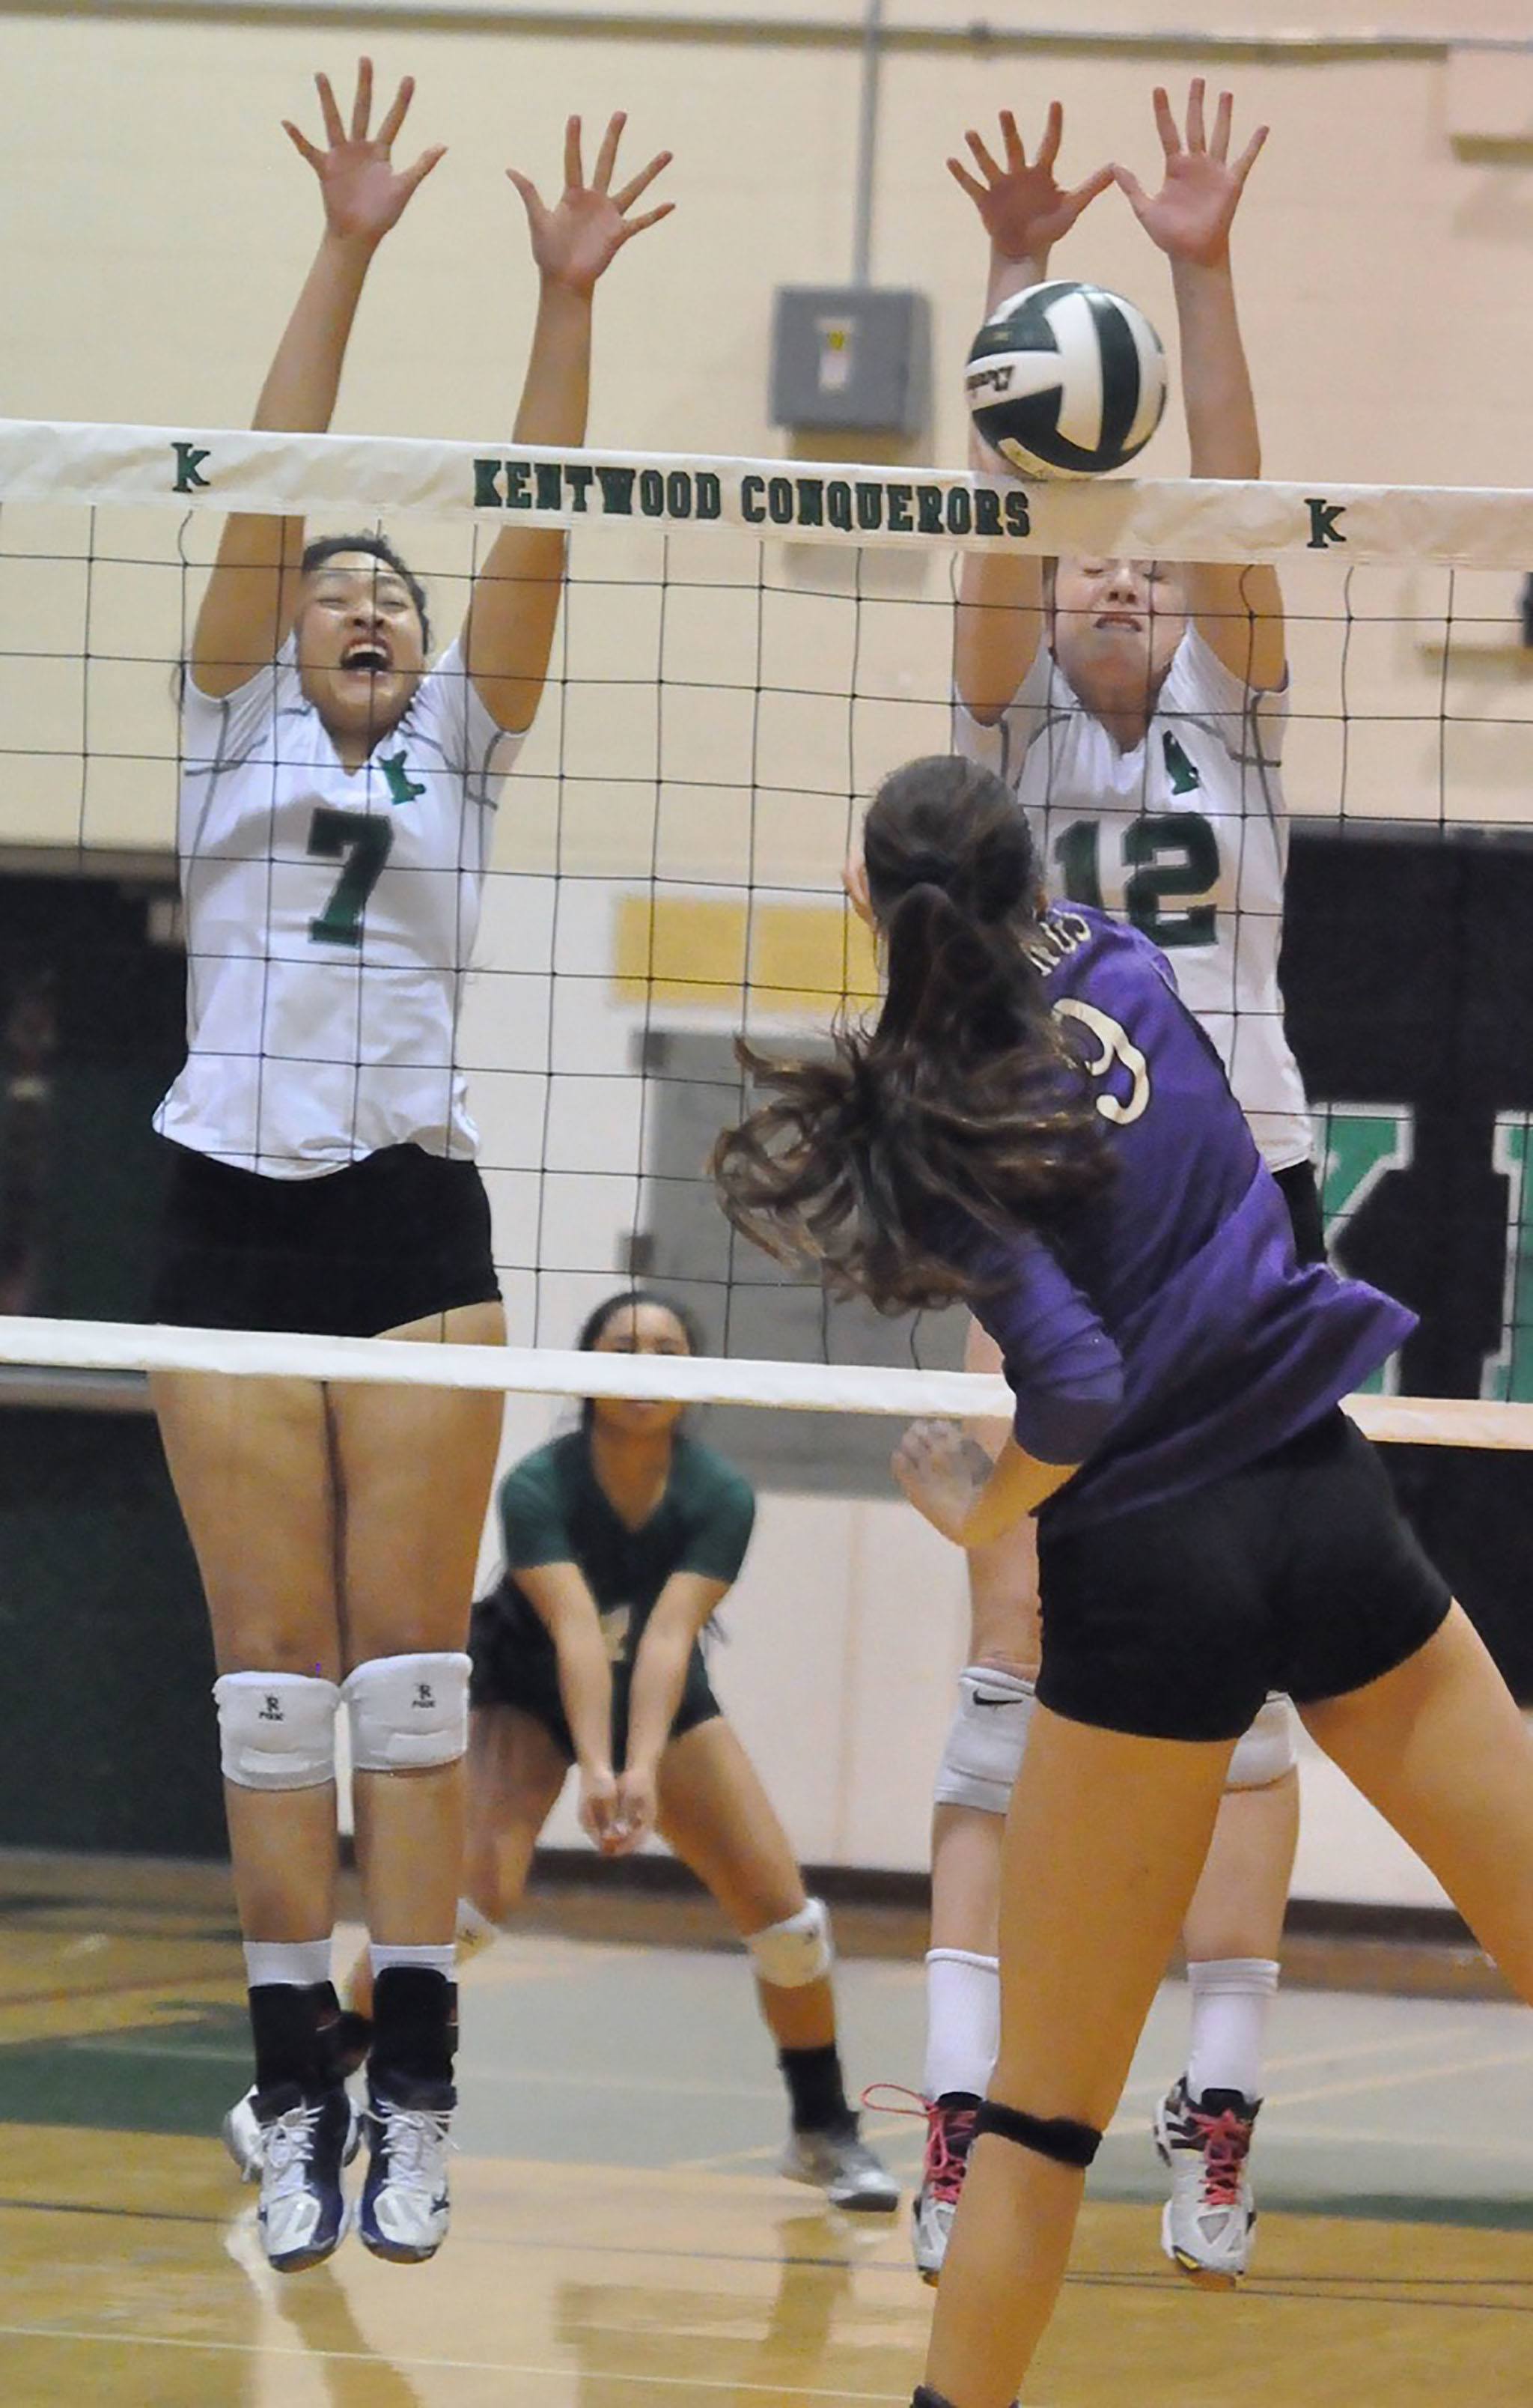 Kentwood’s Alvina Ngo, left, and Erin Gould attempt to block a shot by Puyallup’s Kaitlin Sugai during district action Saturday in the Conquerors gym. RACHEL CIAMPI, Reporter